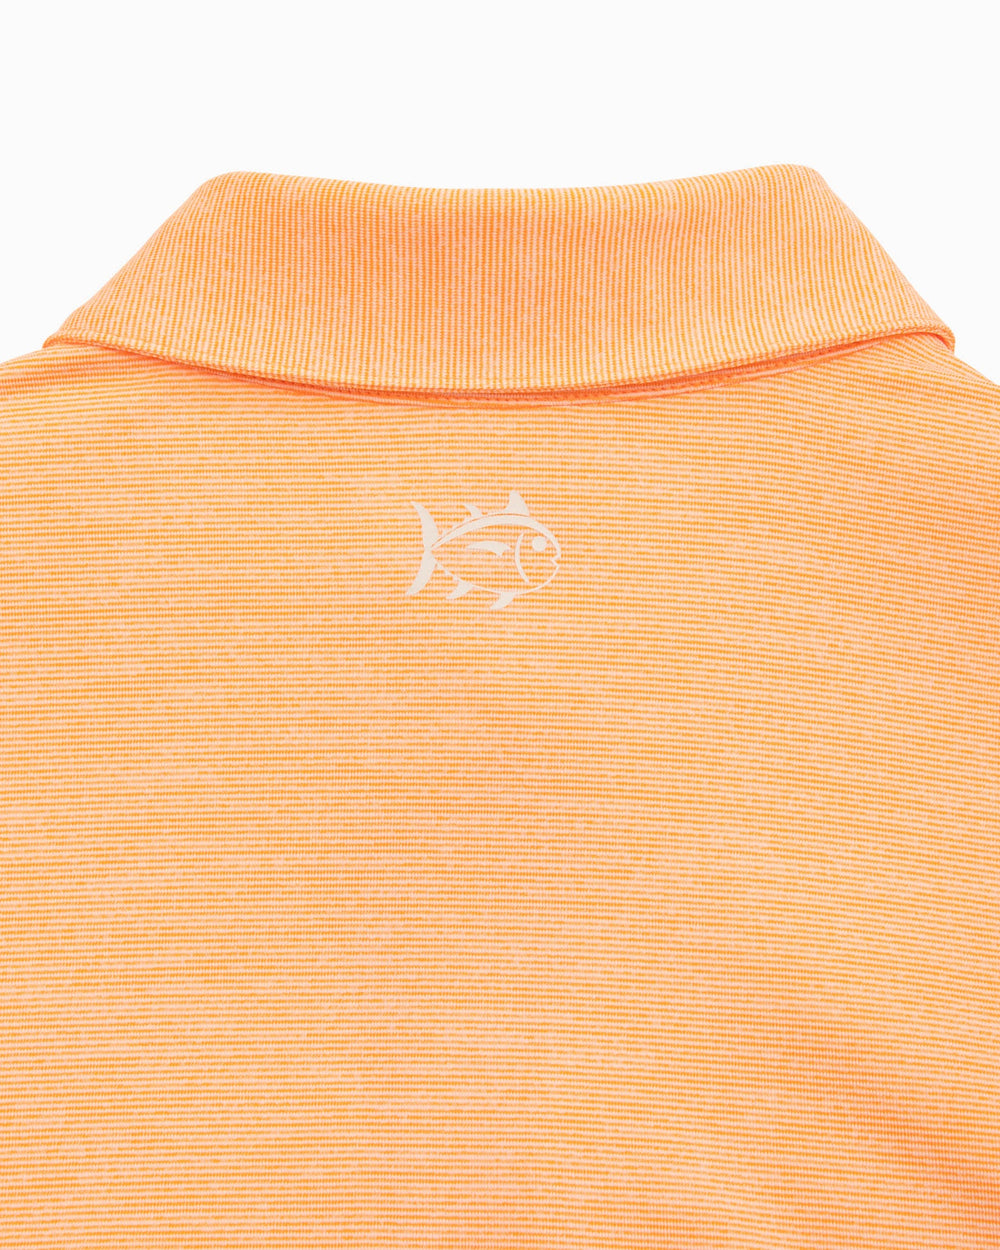 The yoke view of the Tennessee Vols Driver Spacedye Polo Shirt by Southern Tide - Rocky Top Orange